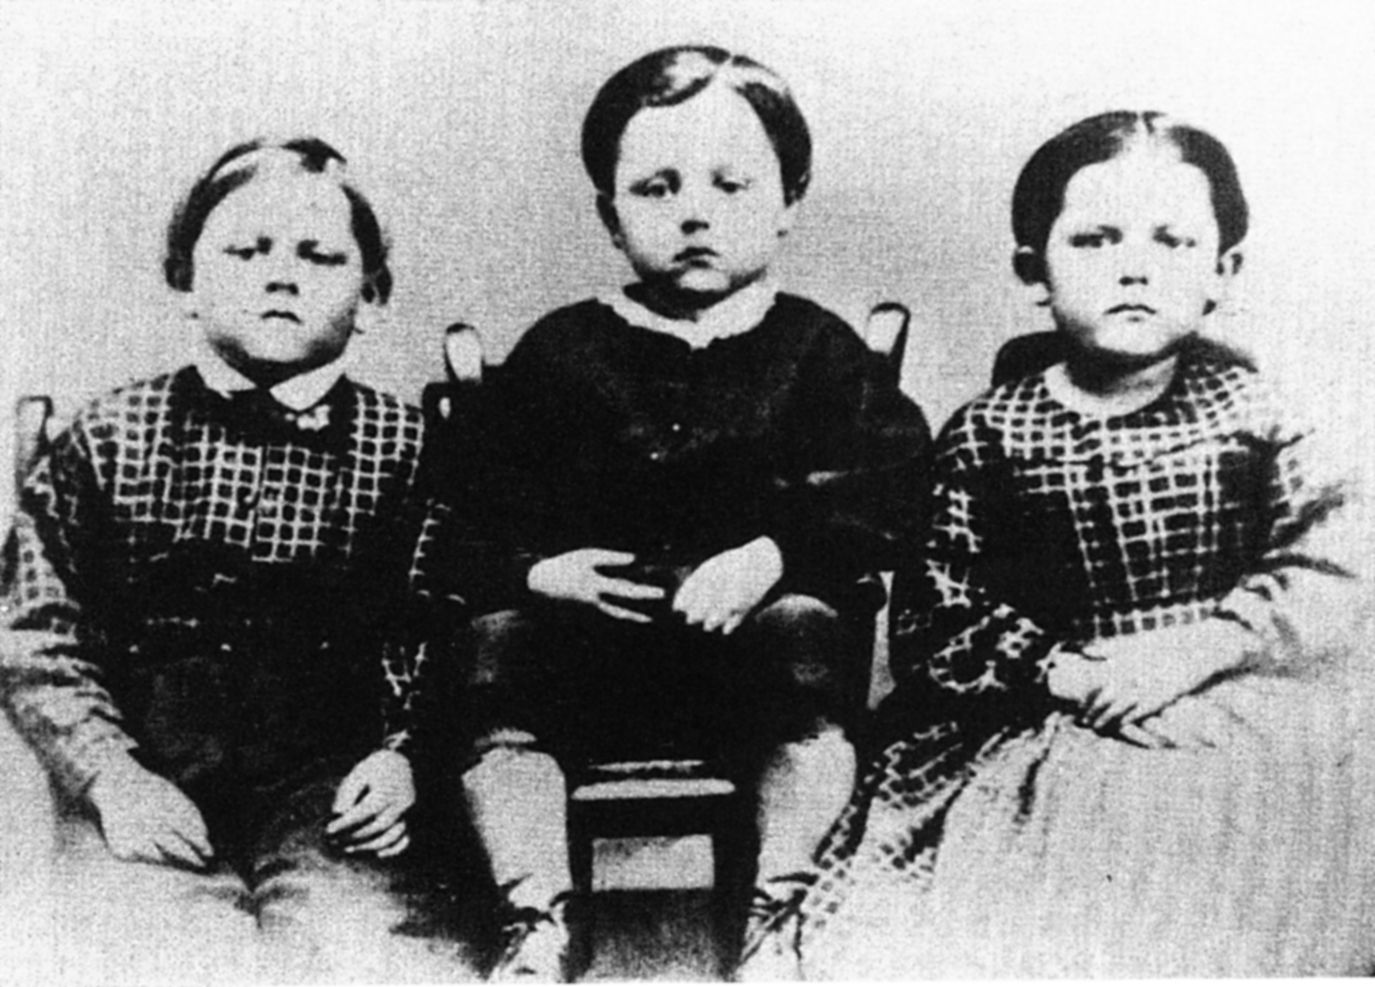 The photo of the Humiston children, found on their father at Gettysburg (National Park Service)